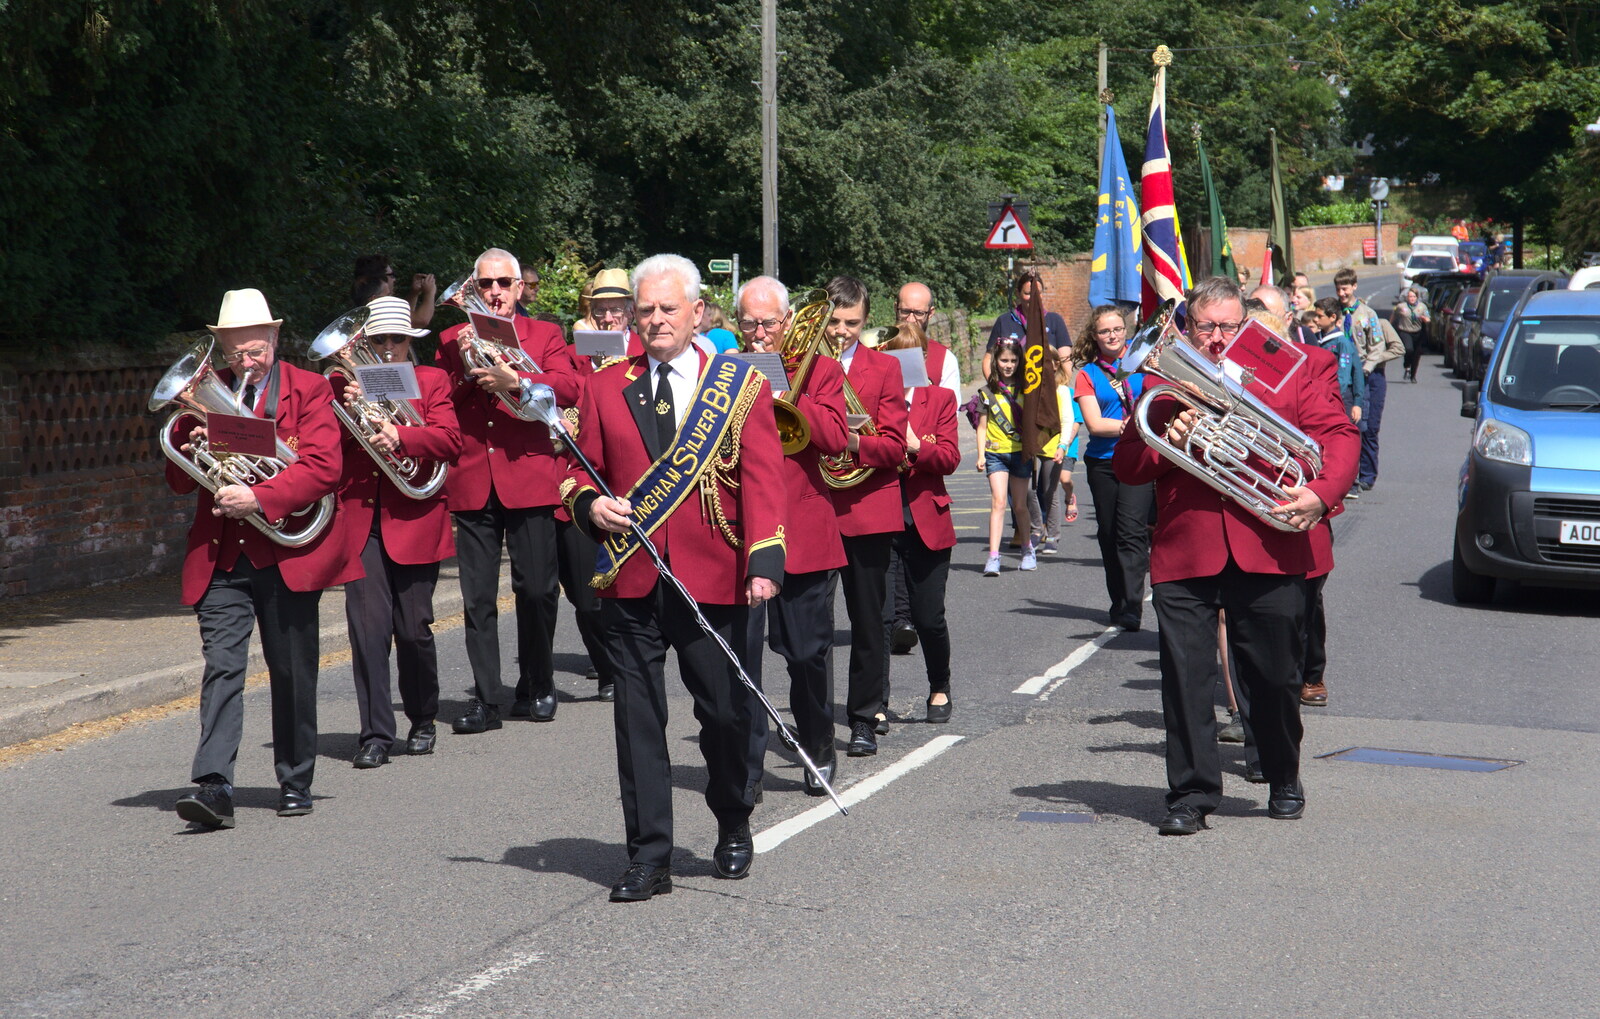 The Gislingham Silver Band marches from The Mayor Making Parade, Eye, Suffolk - 24th June 2018